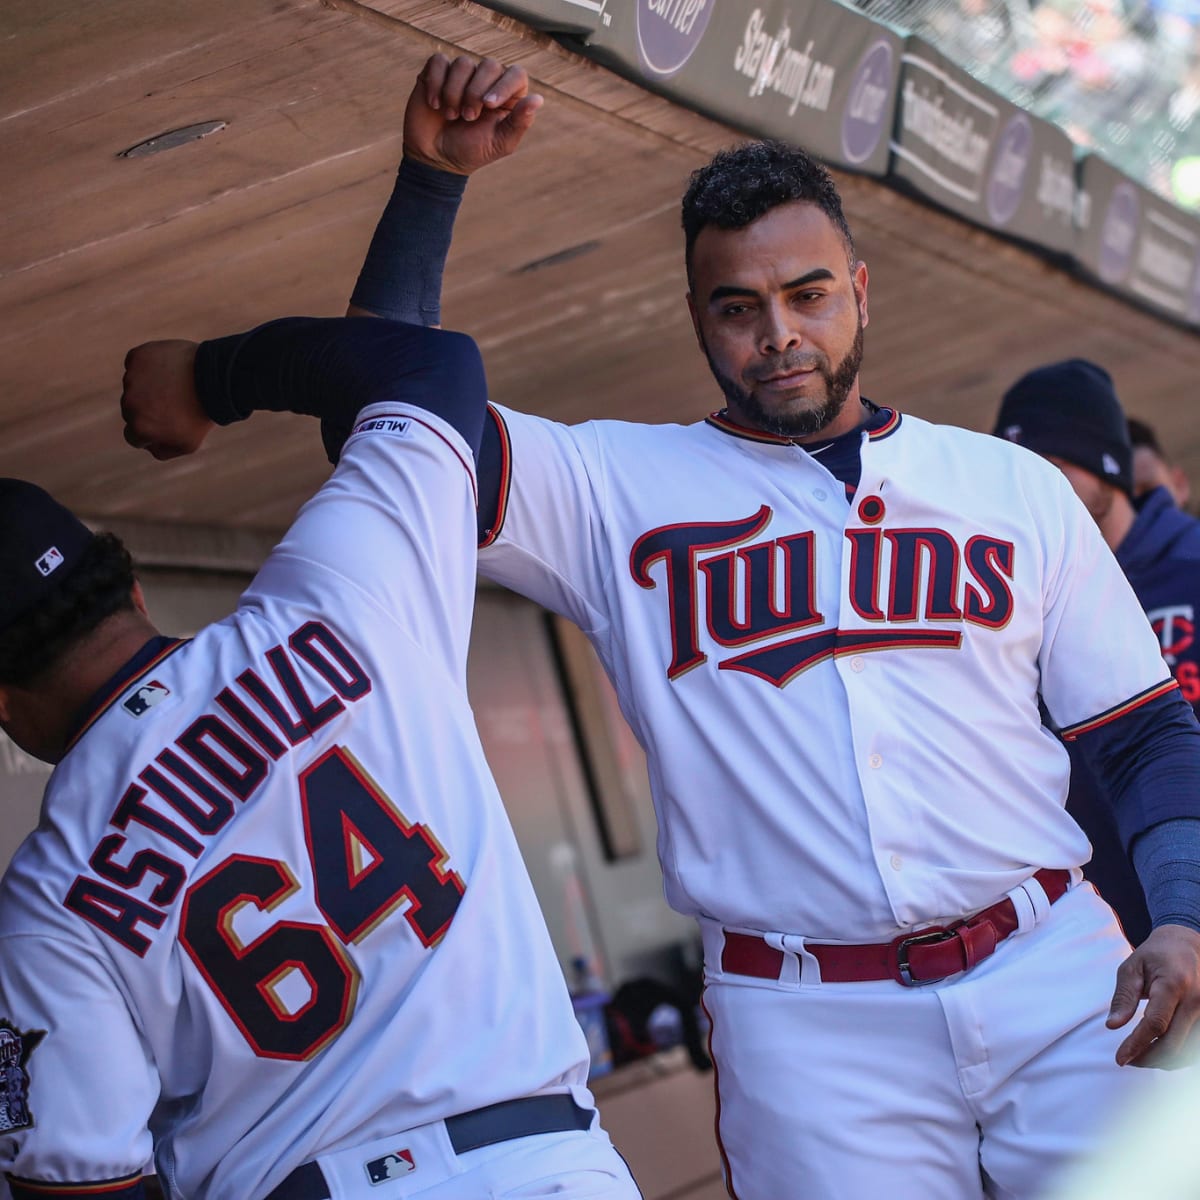 The Twins are capable of repeating as AL Central champs - Beyond